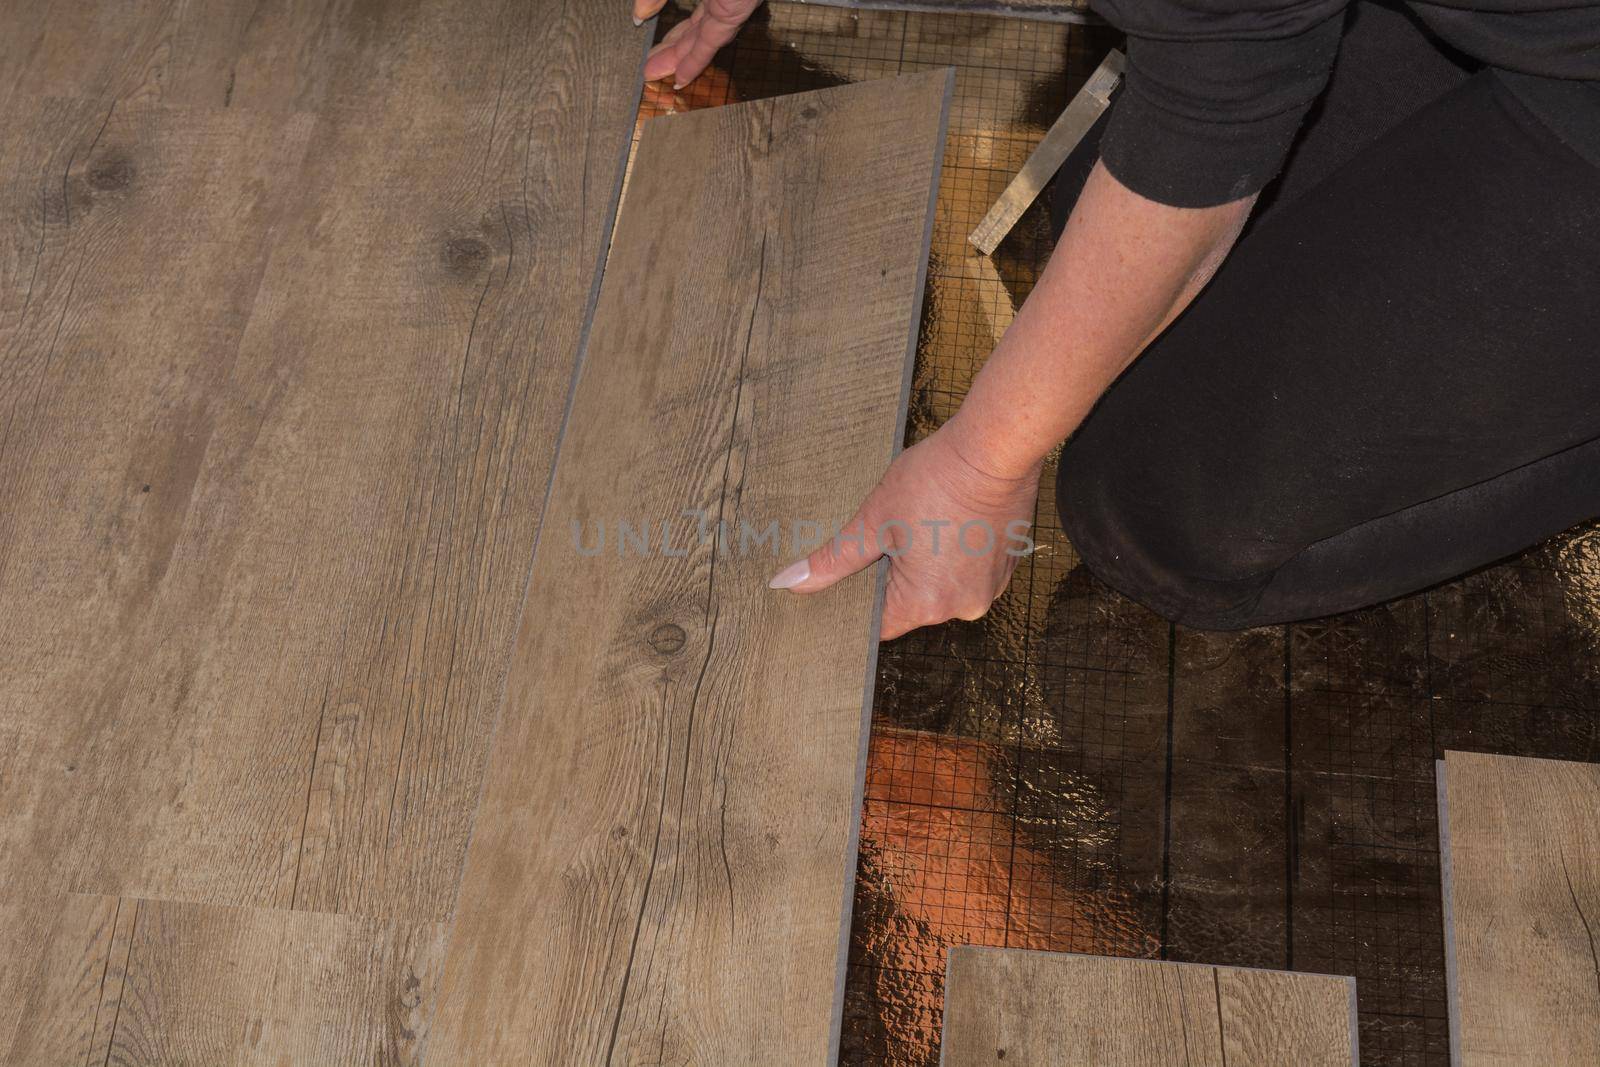 Laying laminate or parquet in the room, worker laying wood or linoleum laminate on the floor and marking the laminate length